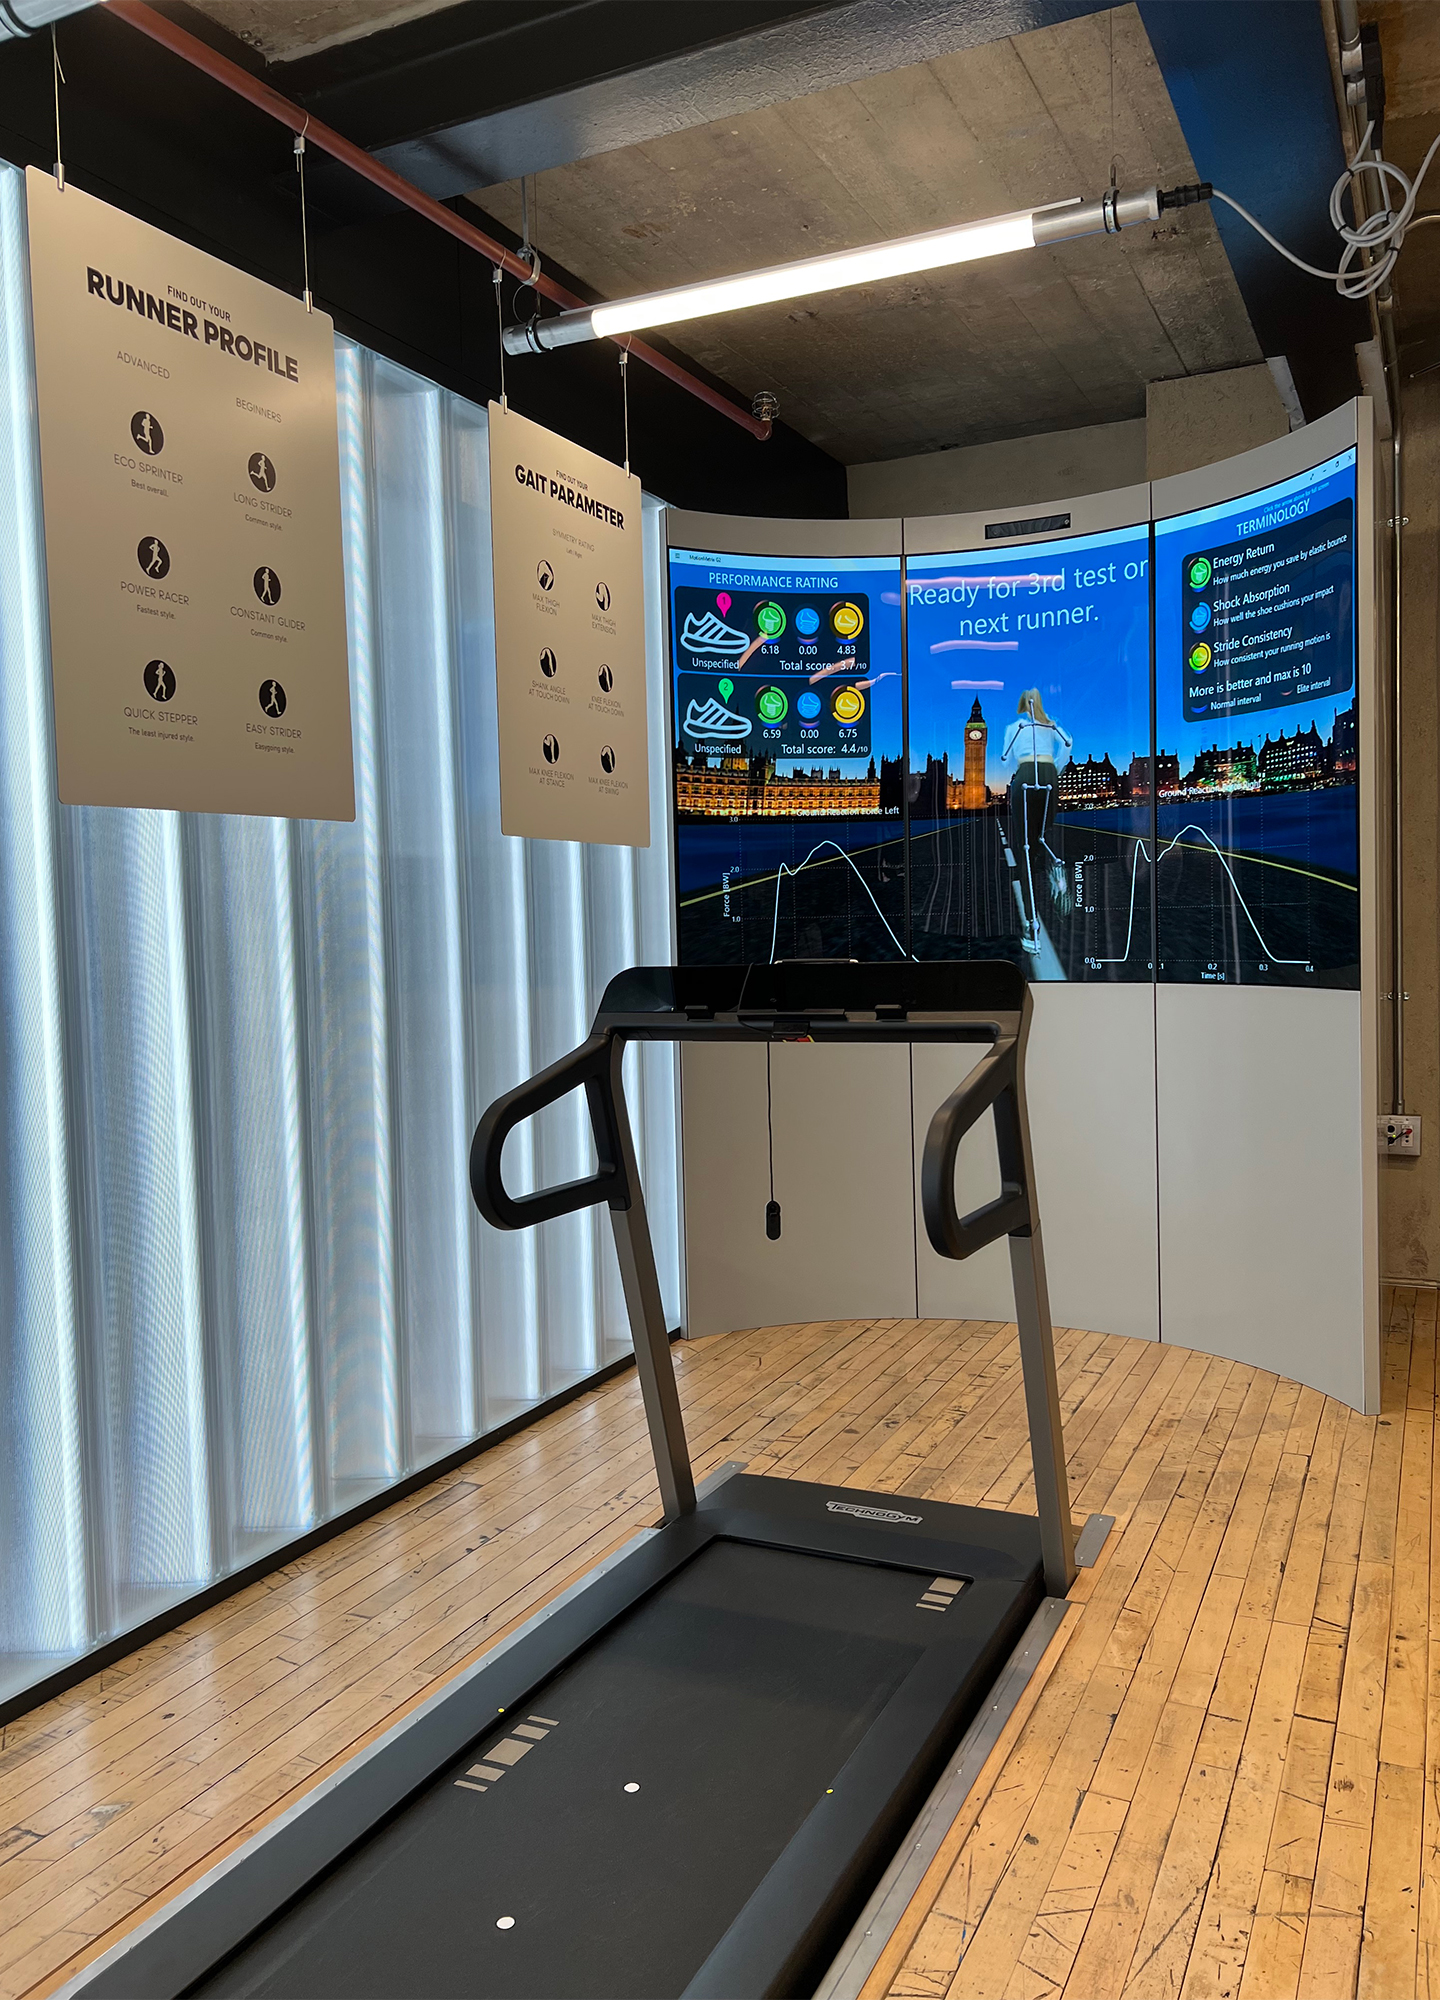 The Adidas Oxford Street store offers a range of bespoke services: consumers can arrange a product test in the Running Lab © Courtesy of the authors